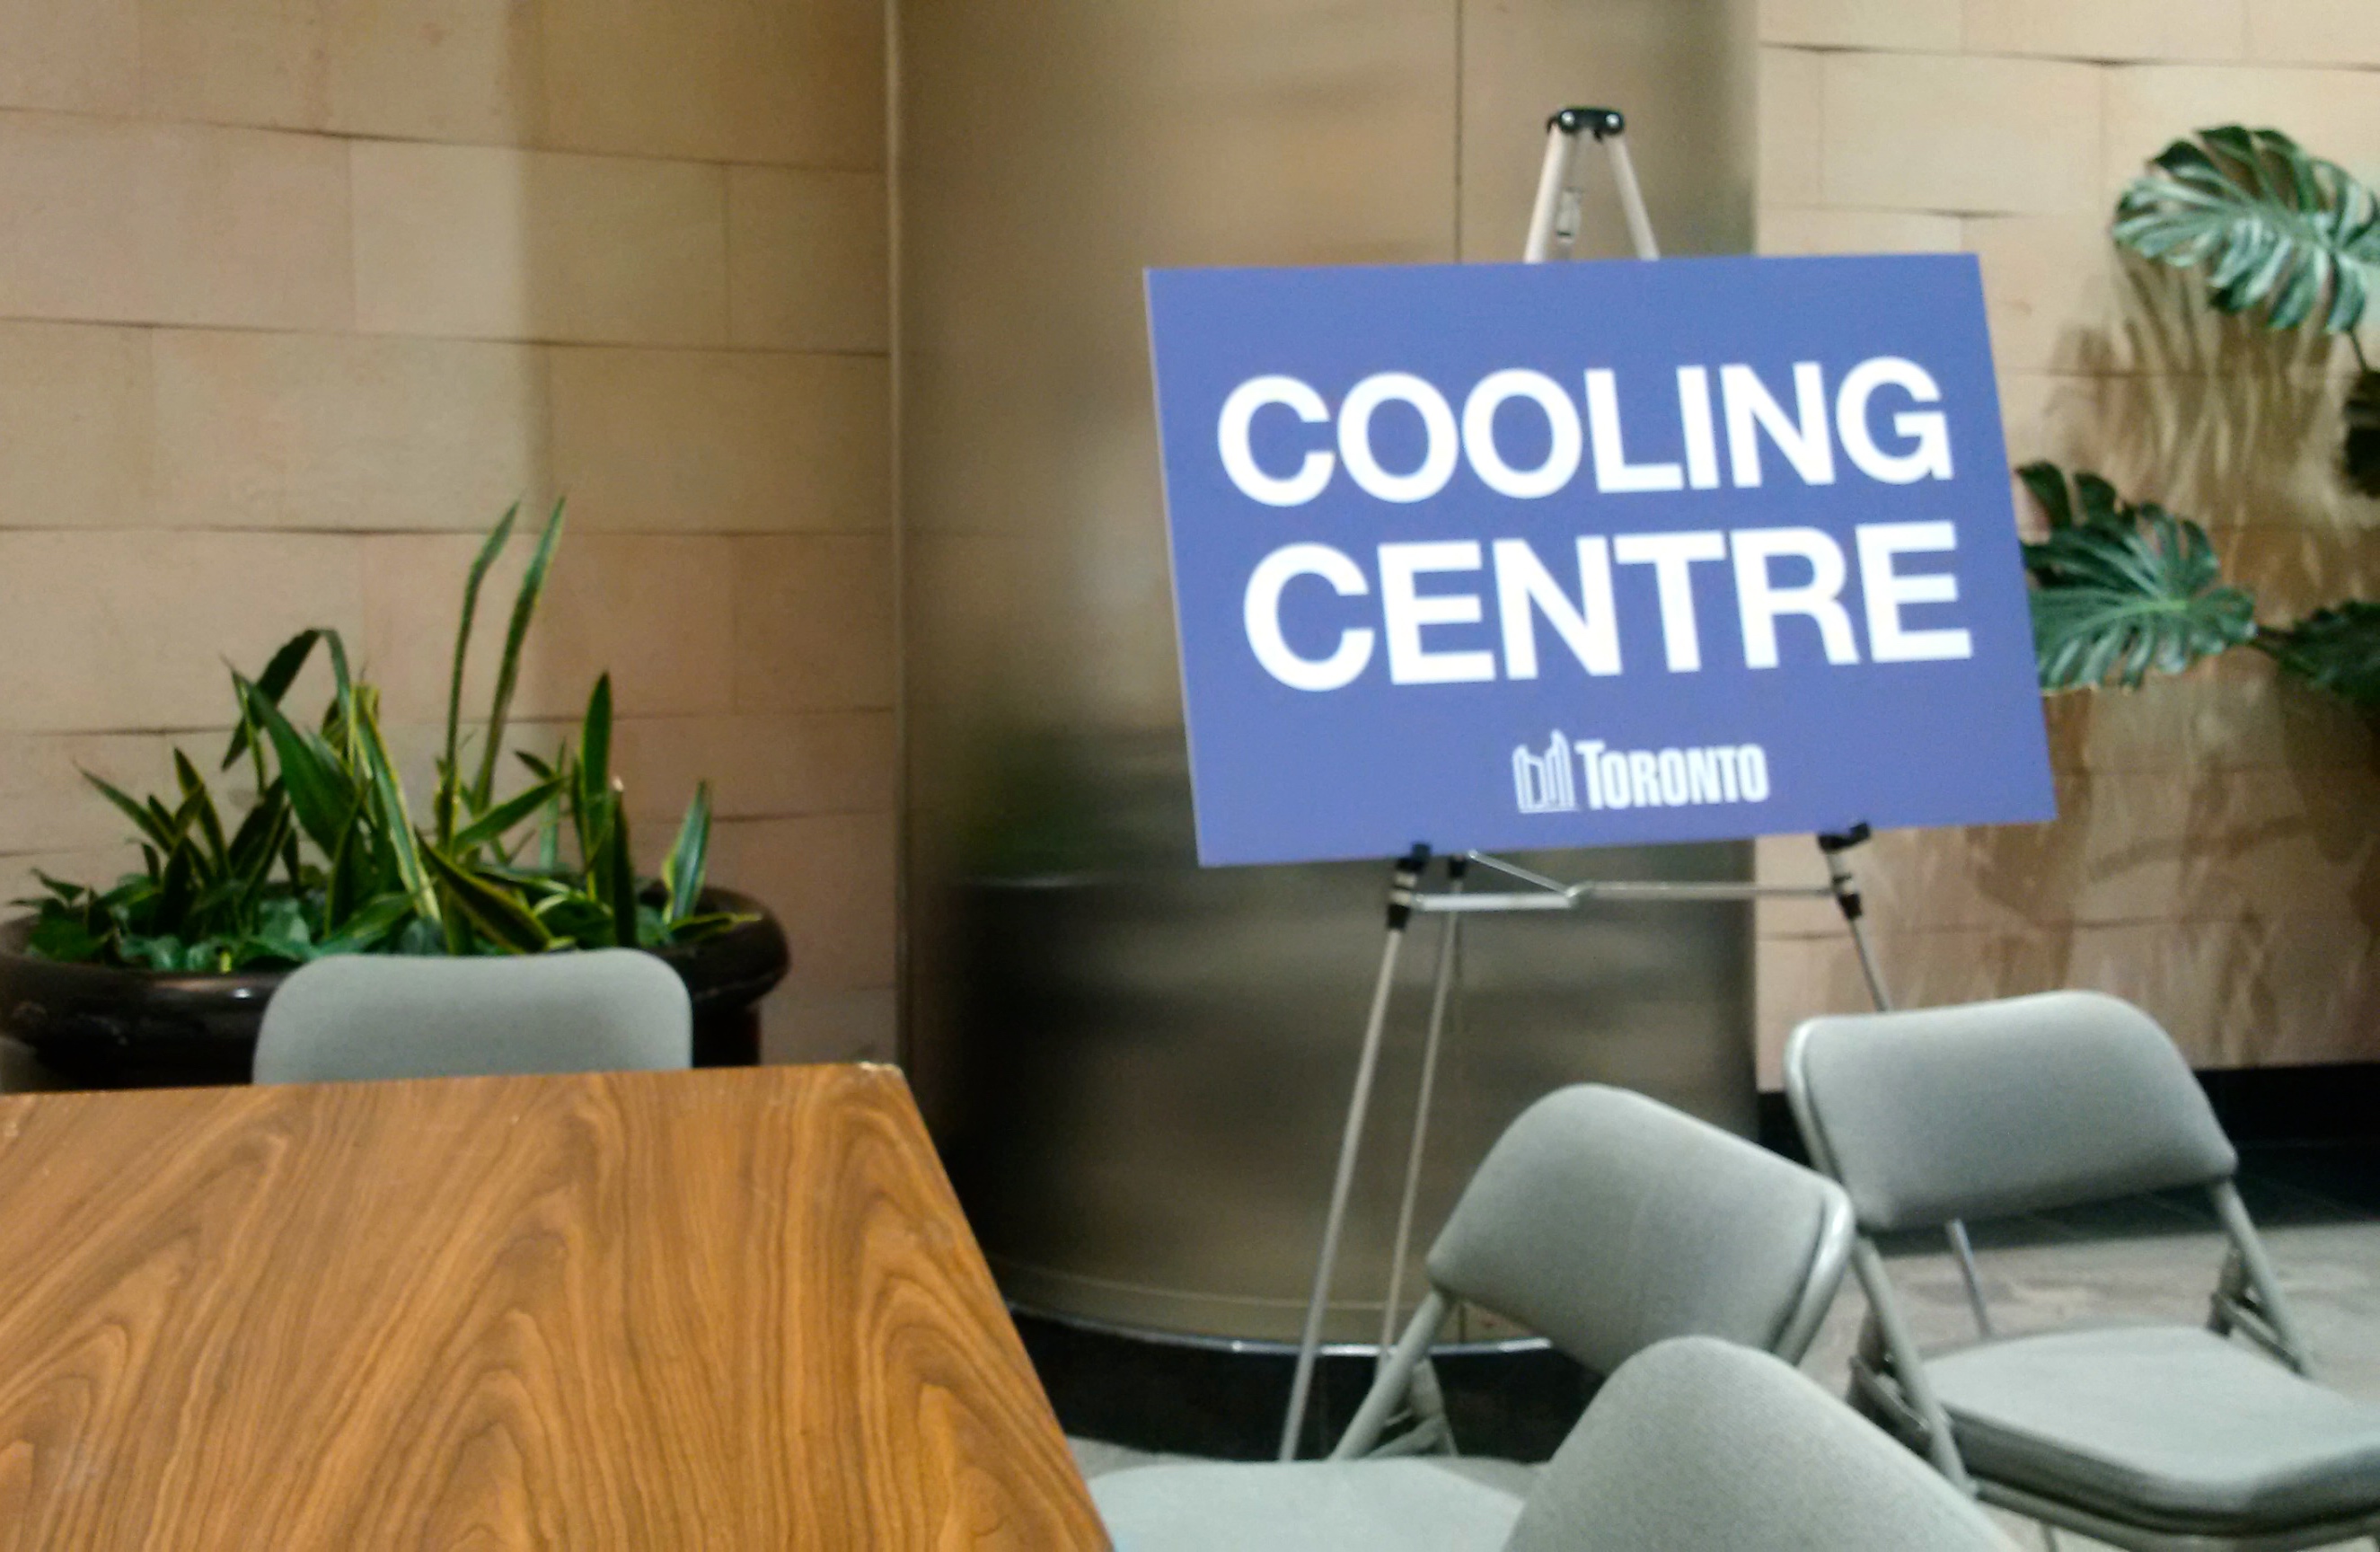 A table and chairs in a hallway with a sign that says Cooling Centre. Image: Cathy Crowe